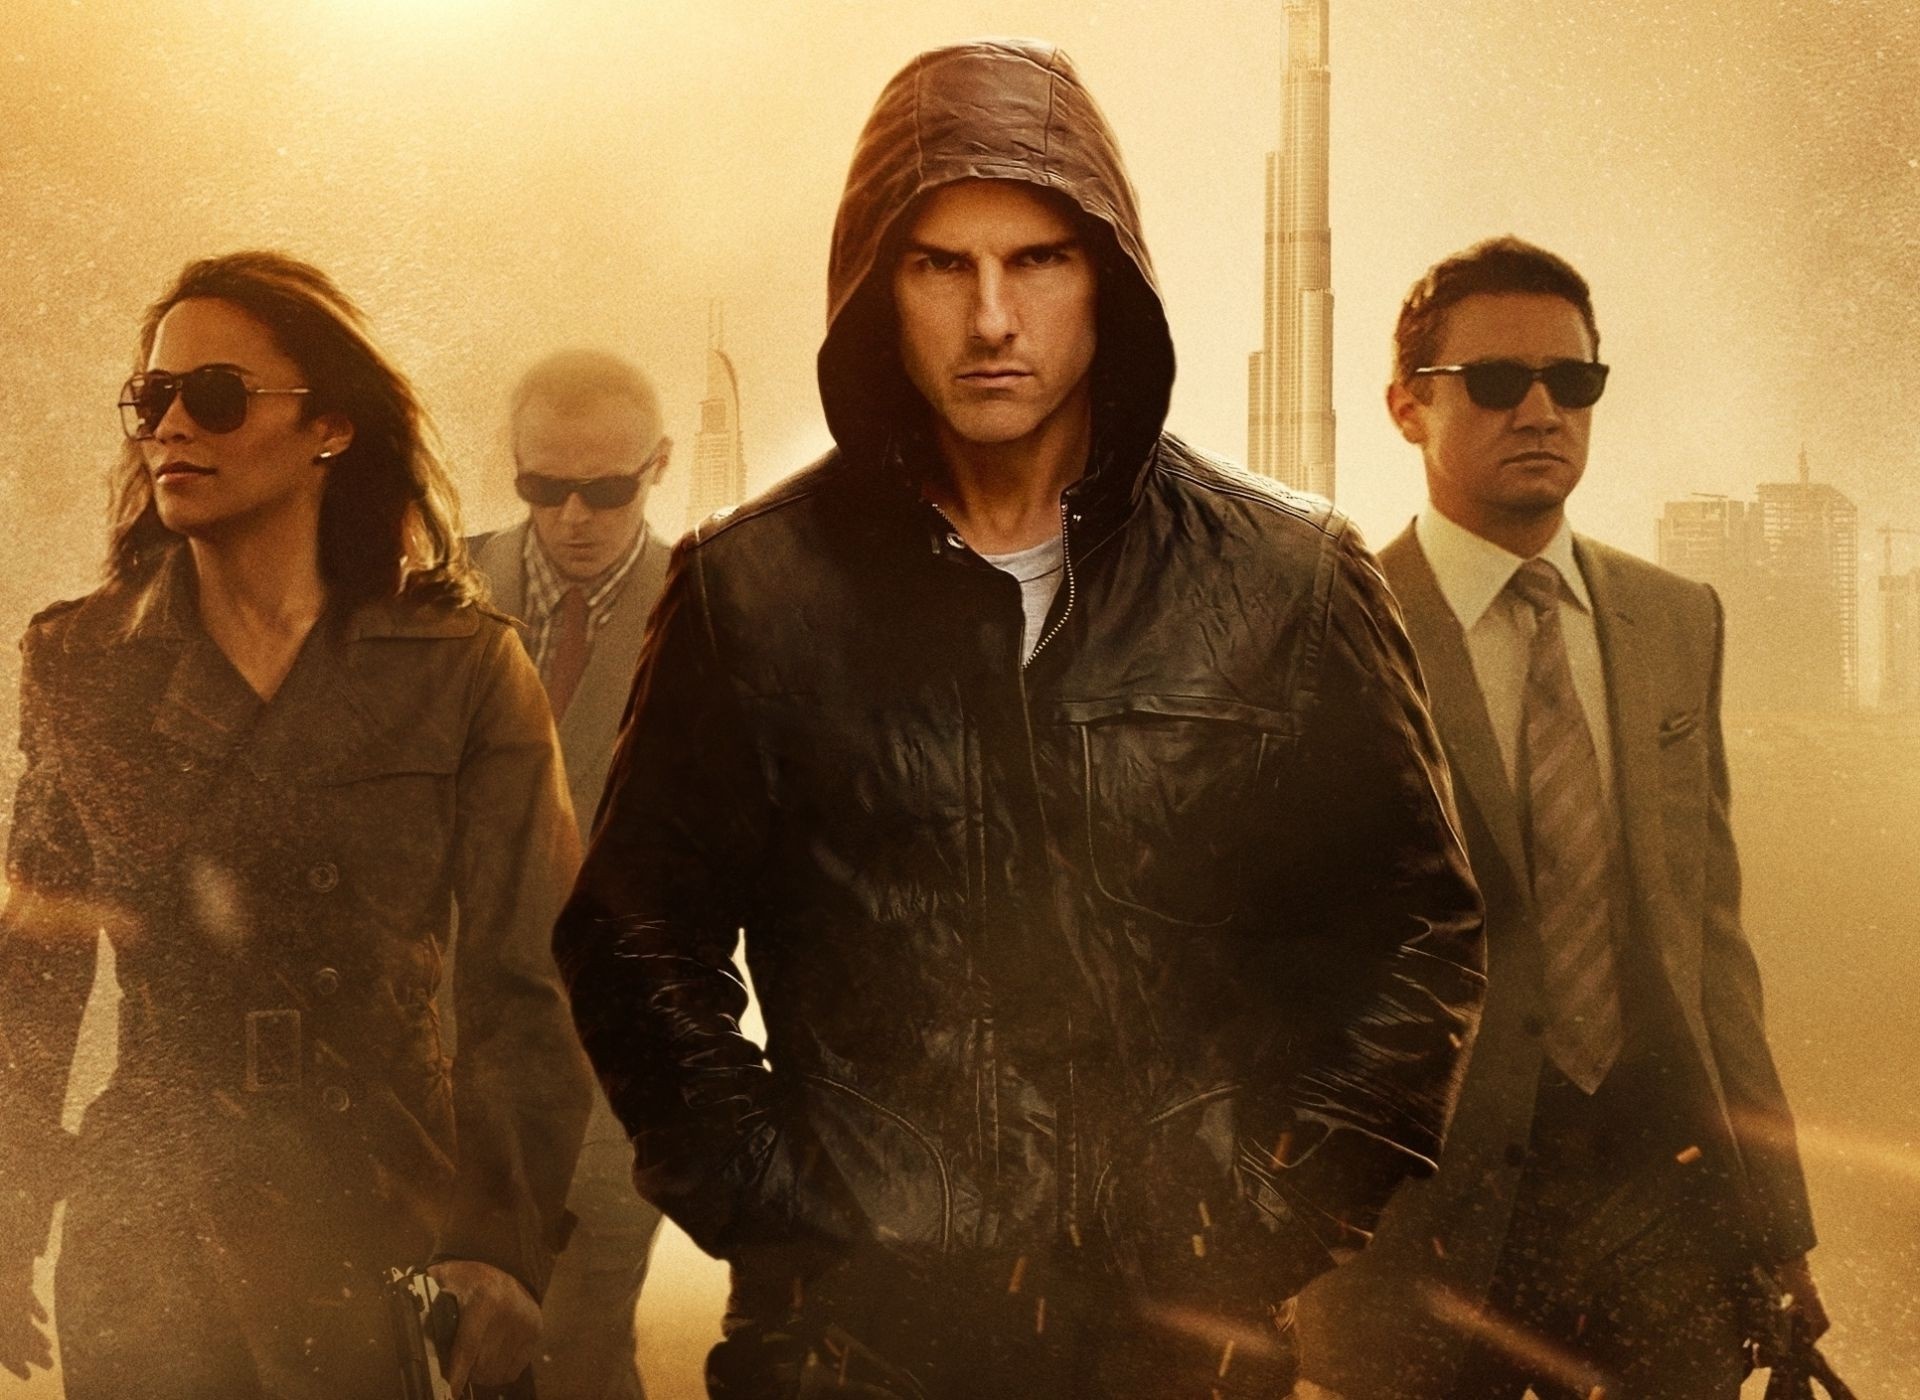 Mission: Impossible Ghost Protocol wallpapers, Thrilling action sequences, Unforgettable movie moments, 1920x1400 HD Desktop